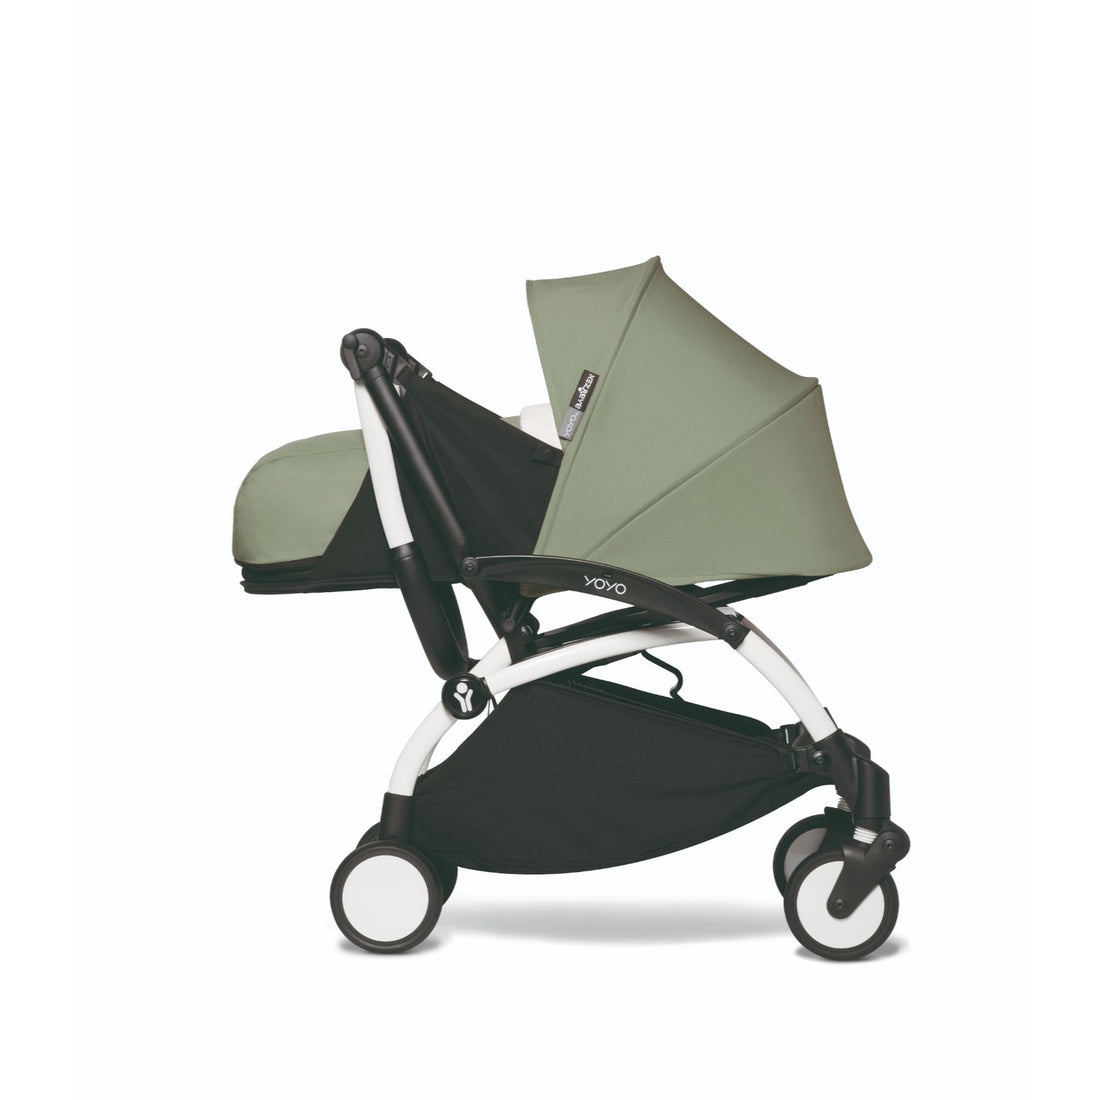 BABYZEN YOYO² 0+ 6+ Baby Stroller Complete Set - White Frame with Olive 0+ Newborn Pack & 6+ Color Pack